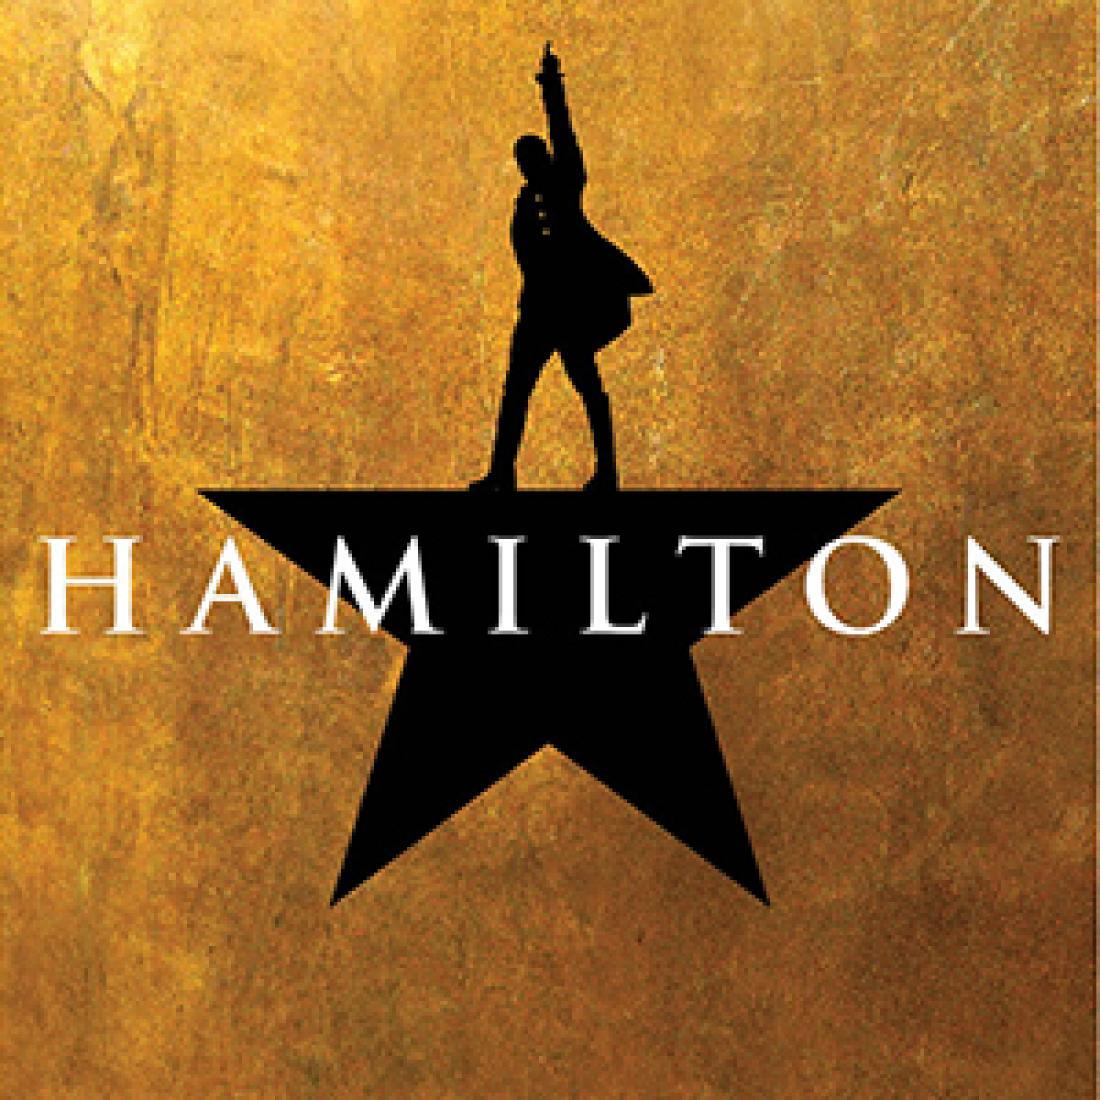 Promotional image for musical Hamilton